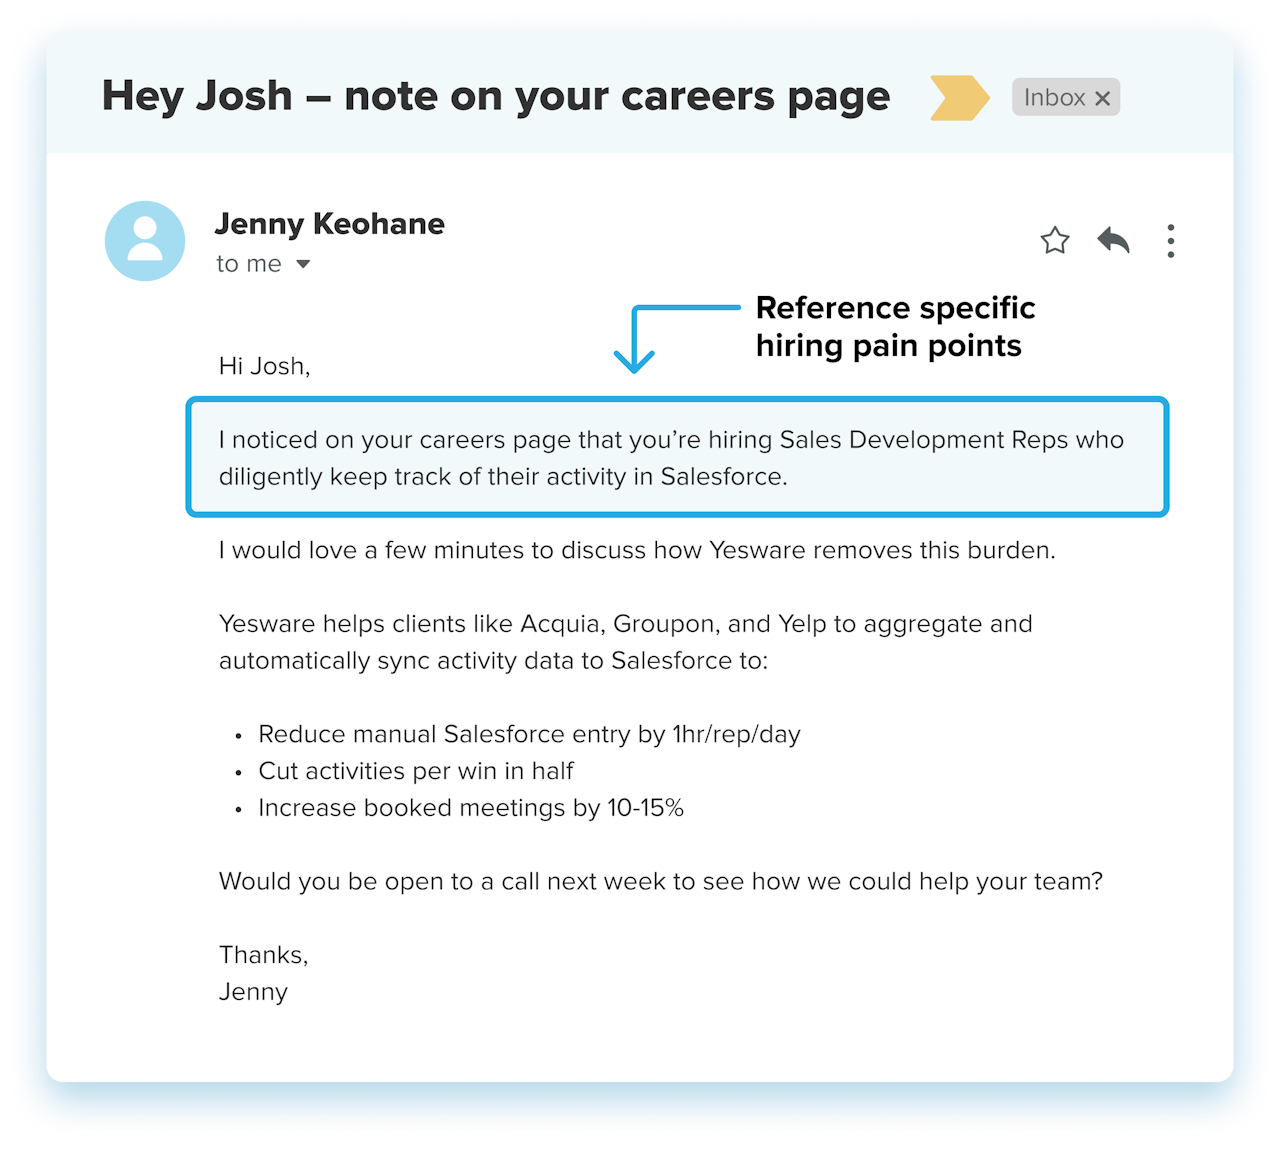 personalized email example: hiring pain points